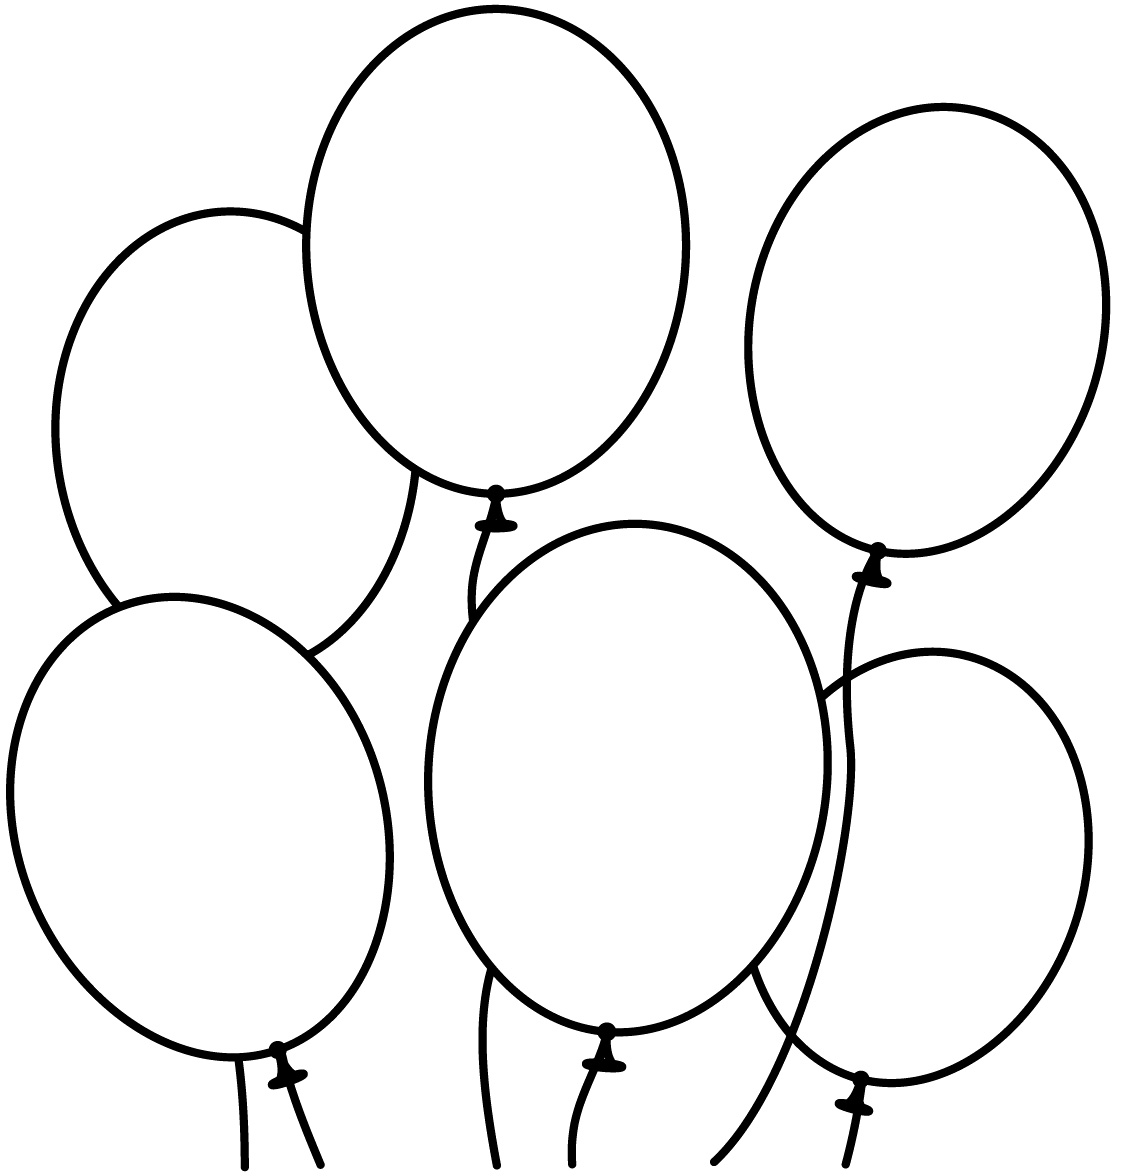 coloring page inside Balloon Coloring Pages Printable - Coloring ...